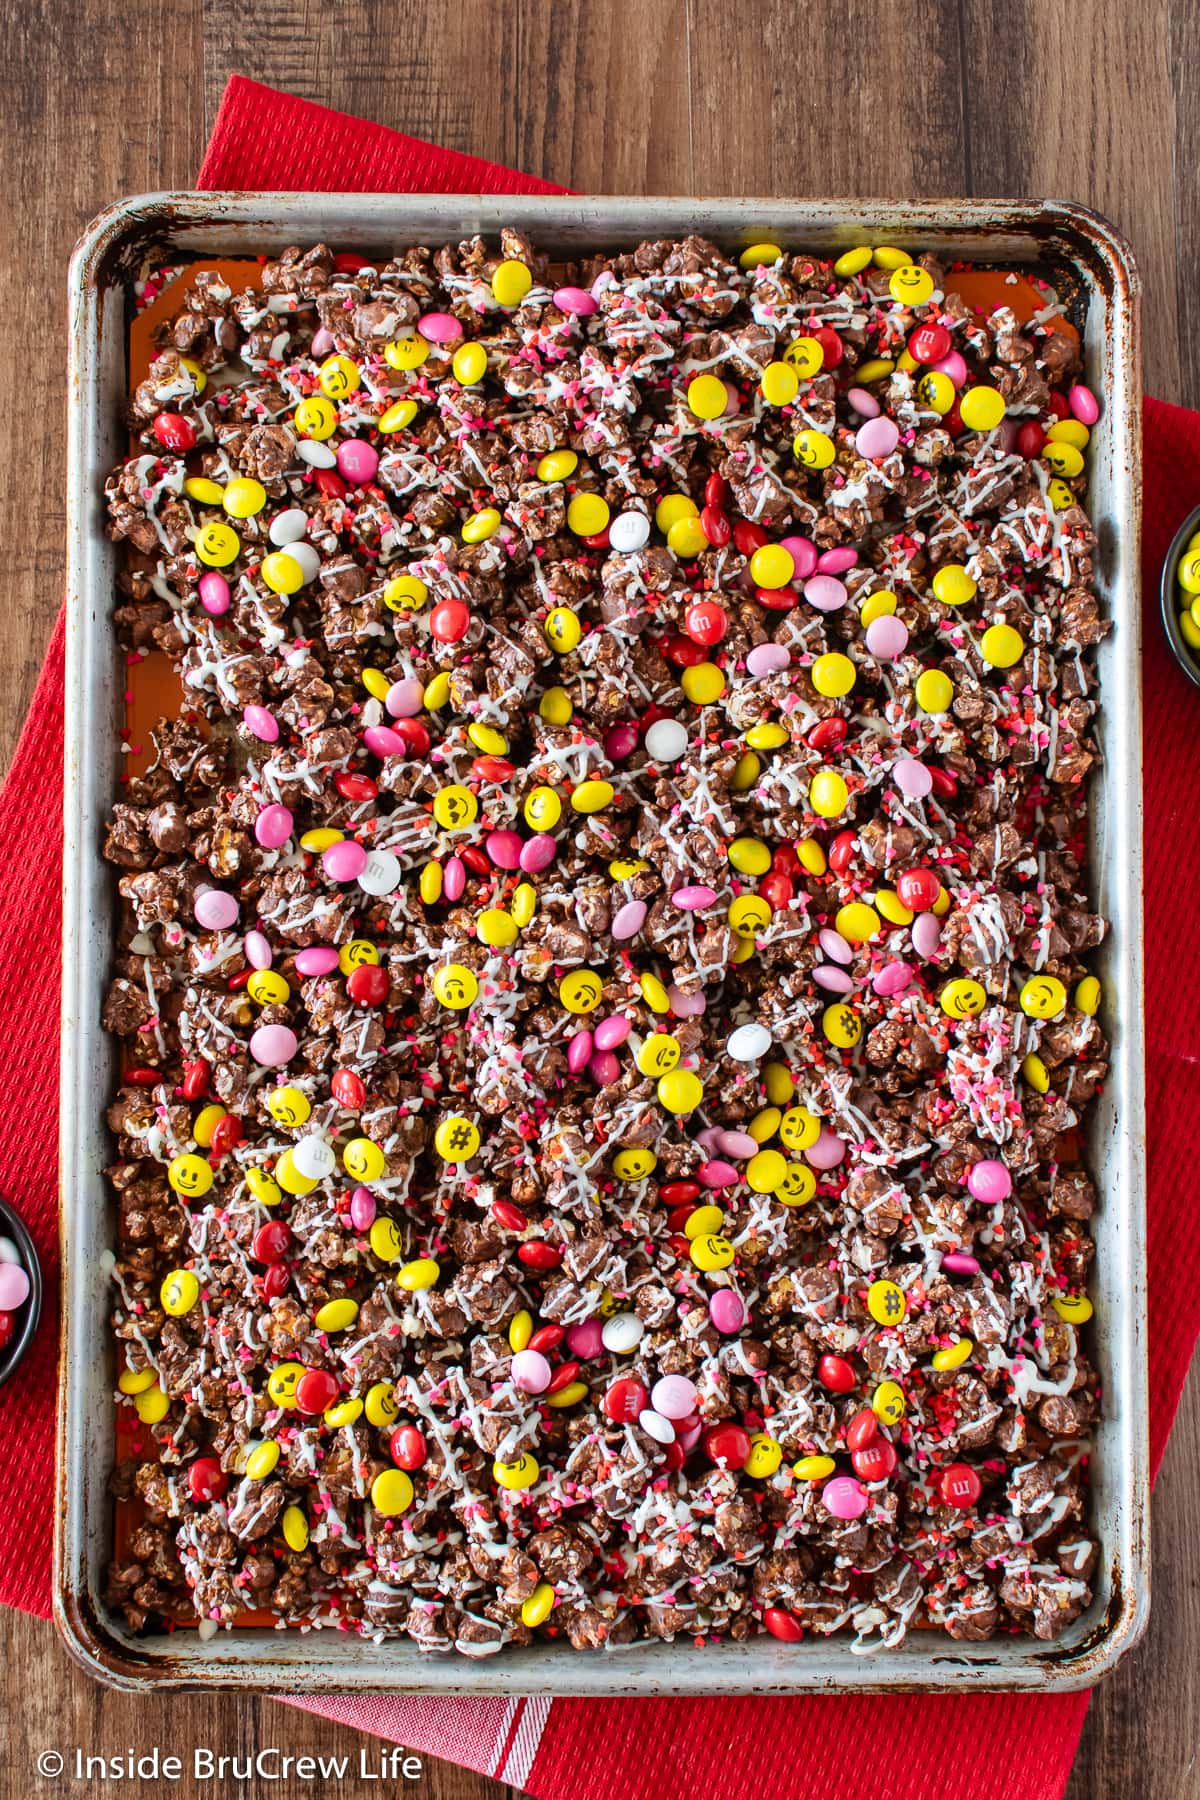 A baking sheet filled with chocolate covered popcorn and candies.